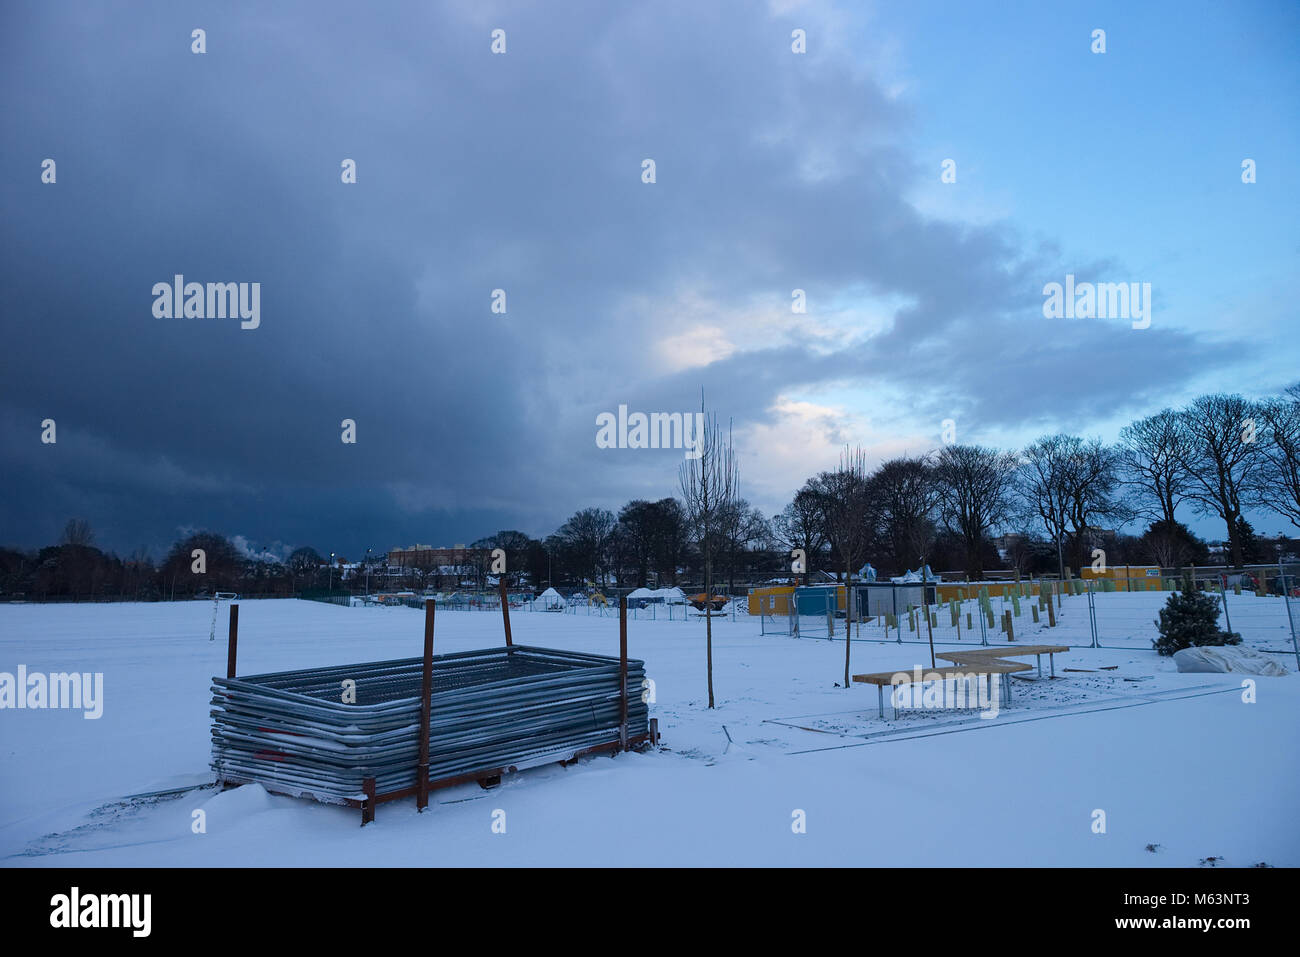 Edinburgh, Scotland, UK. 28th February, 2018. A photograph of the Beast from the East Storm moving into Edinburgh over Saughton Park in late afternoon, close to sunset. Credit: Iscotlanda/Alamy Live News Stock Photo